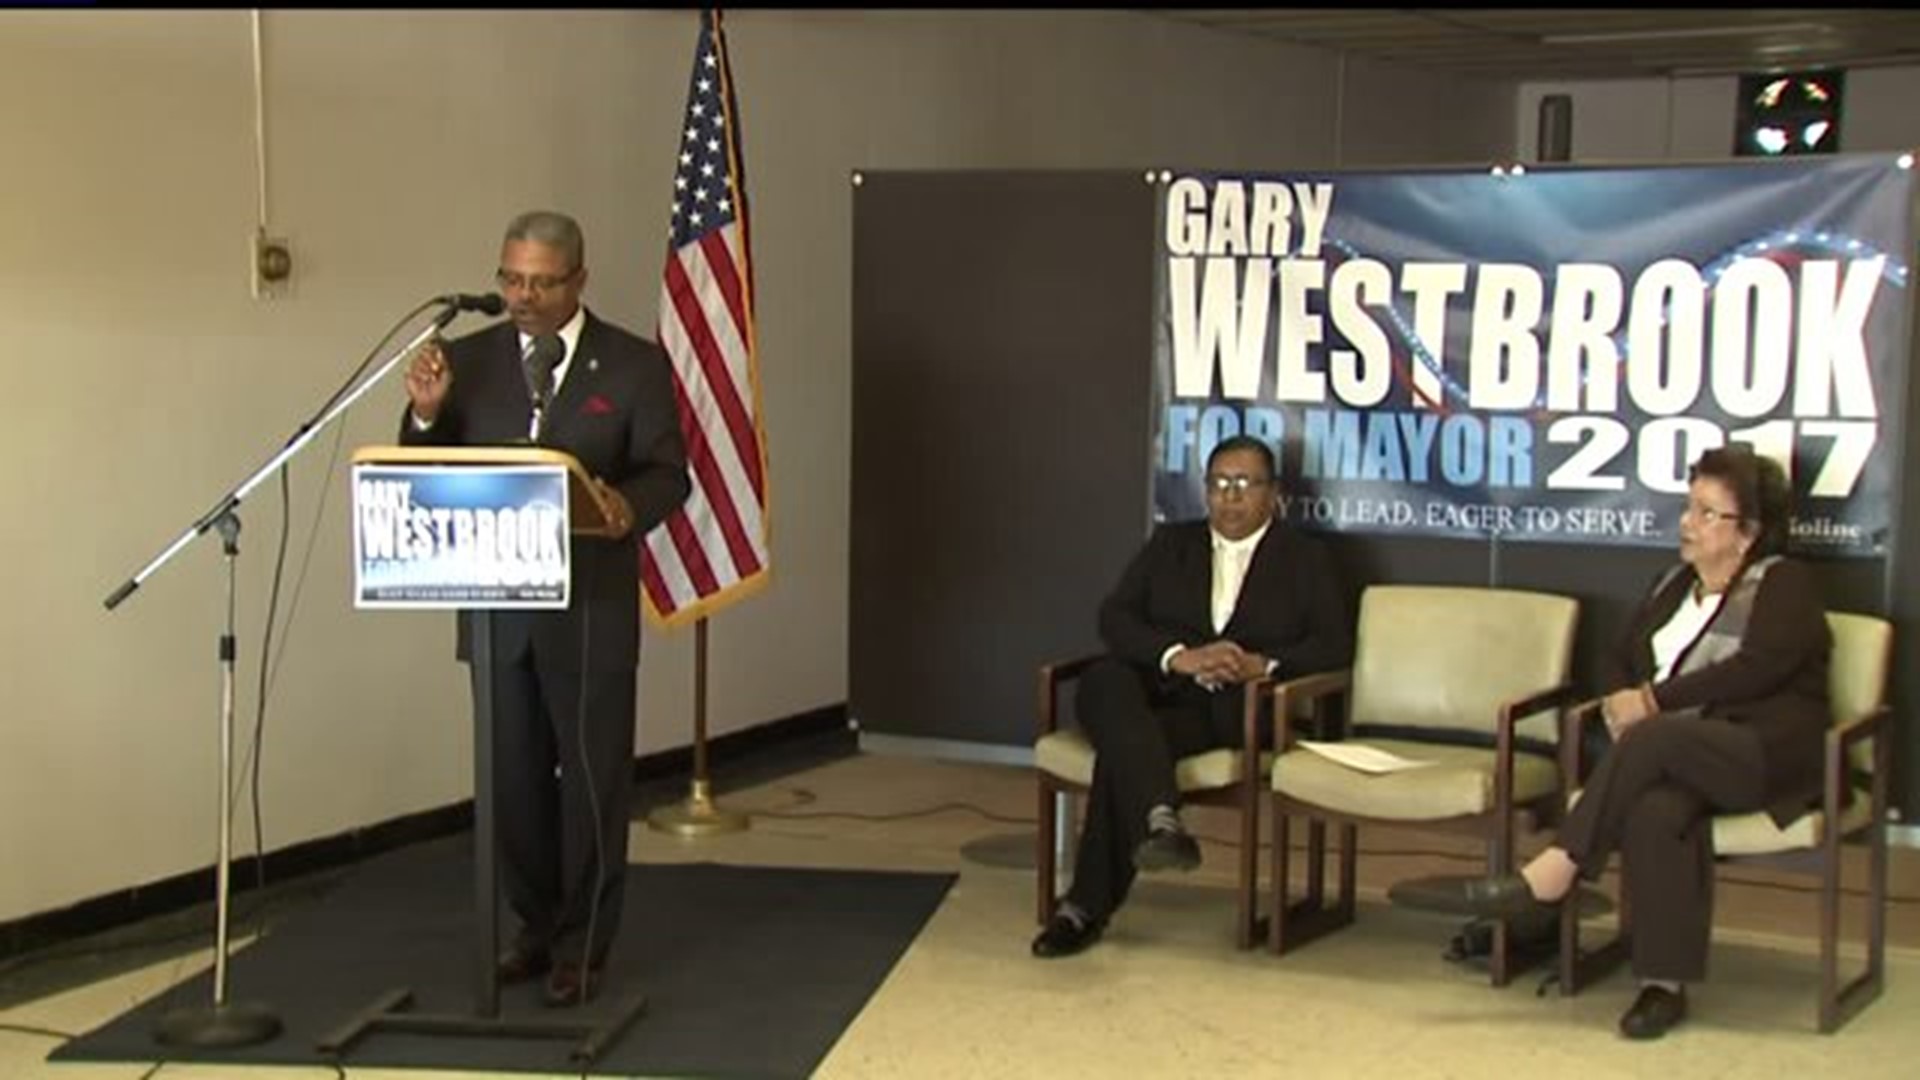 Gary Westbrook running for Mayor in East Moline